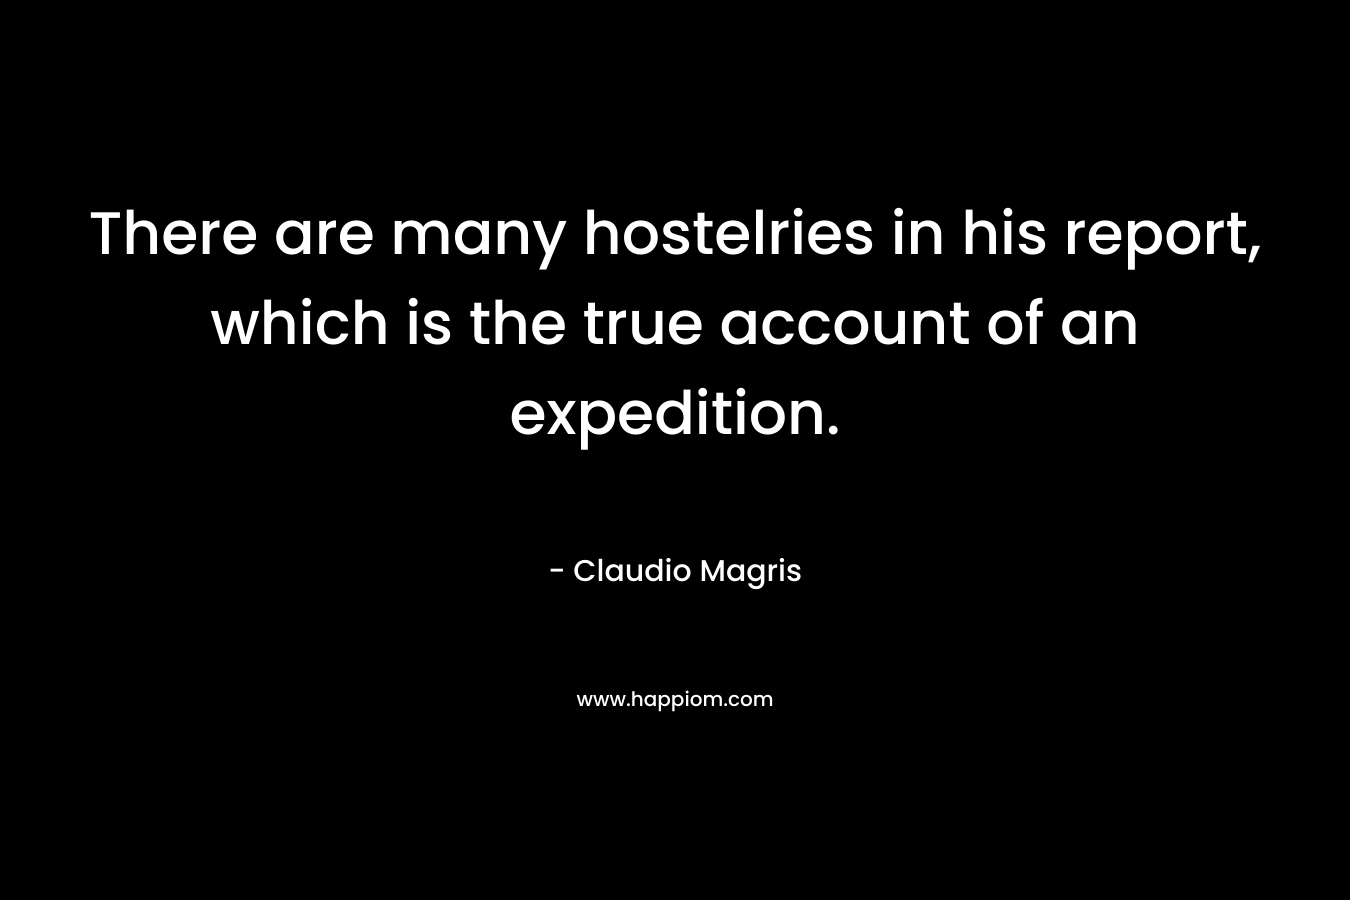 There are many hostelries in his report, which is the true account of an expedition. – Claudio Magris